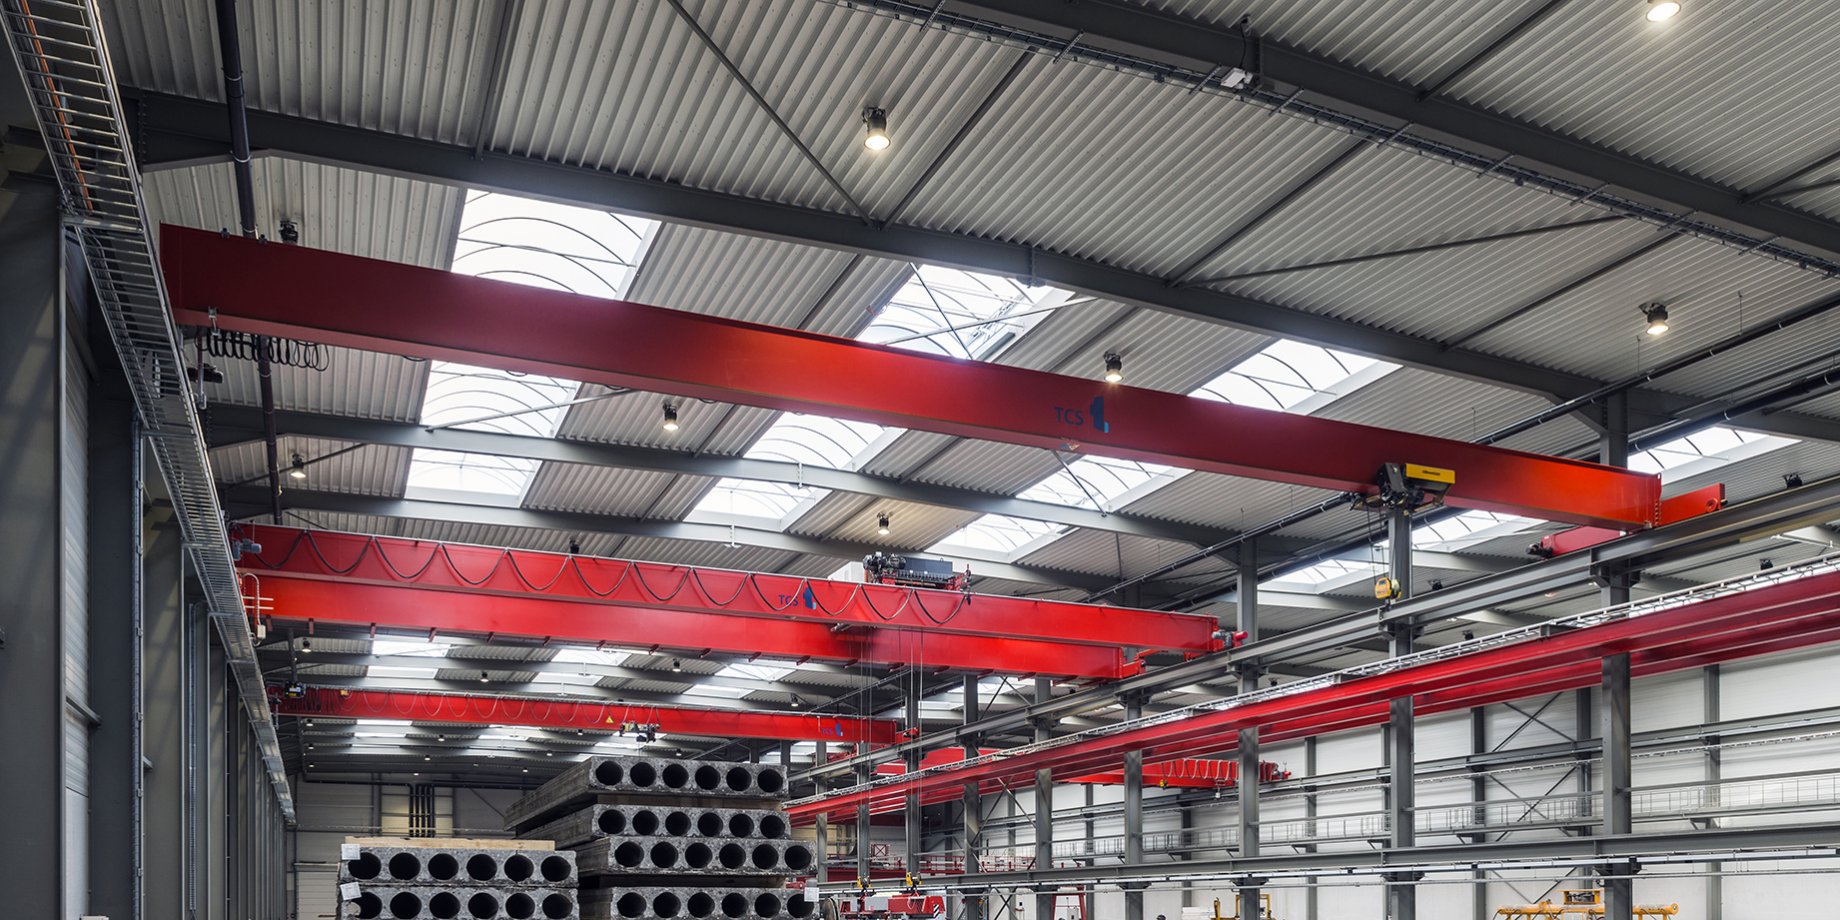 TCS_Timmers_DBK 2x8t - 26 m dual girder overhead cranes equipped with intelligent motion control